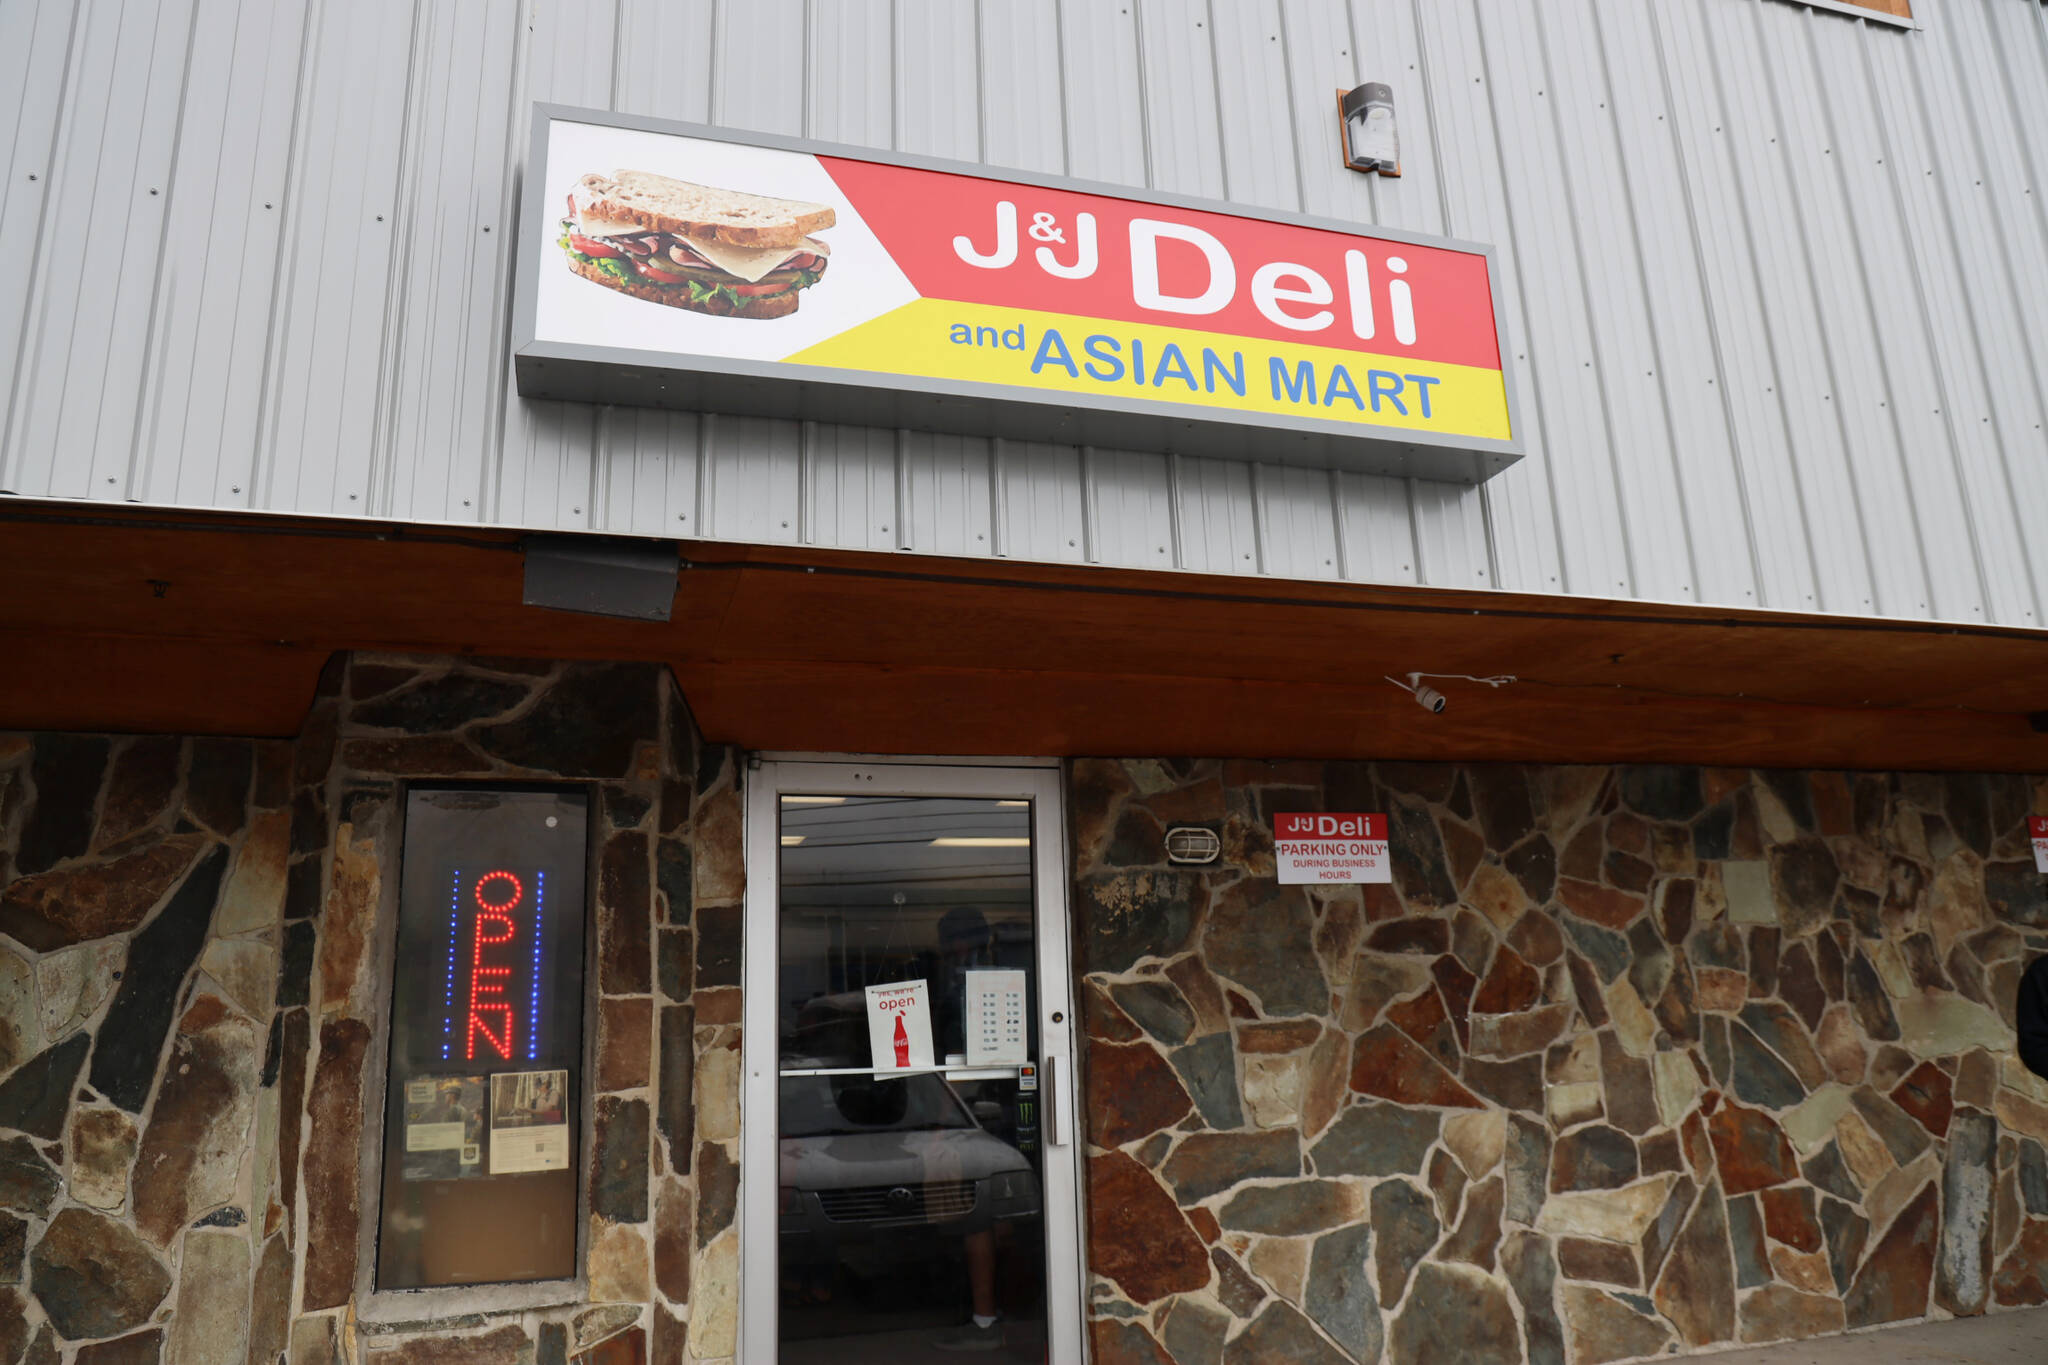 An open sign beams neon colors for the last time Monday afternoon at J&J Deli and Asian Mart. (Clarise Larson / Juneau Empire)